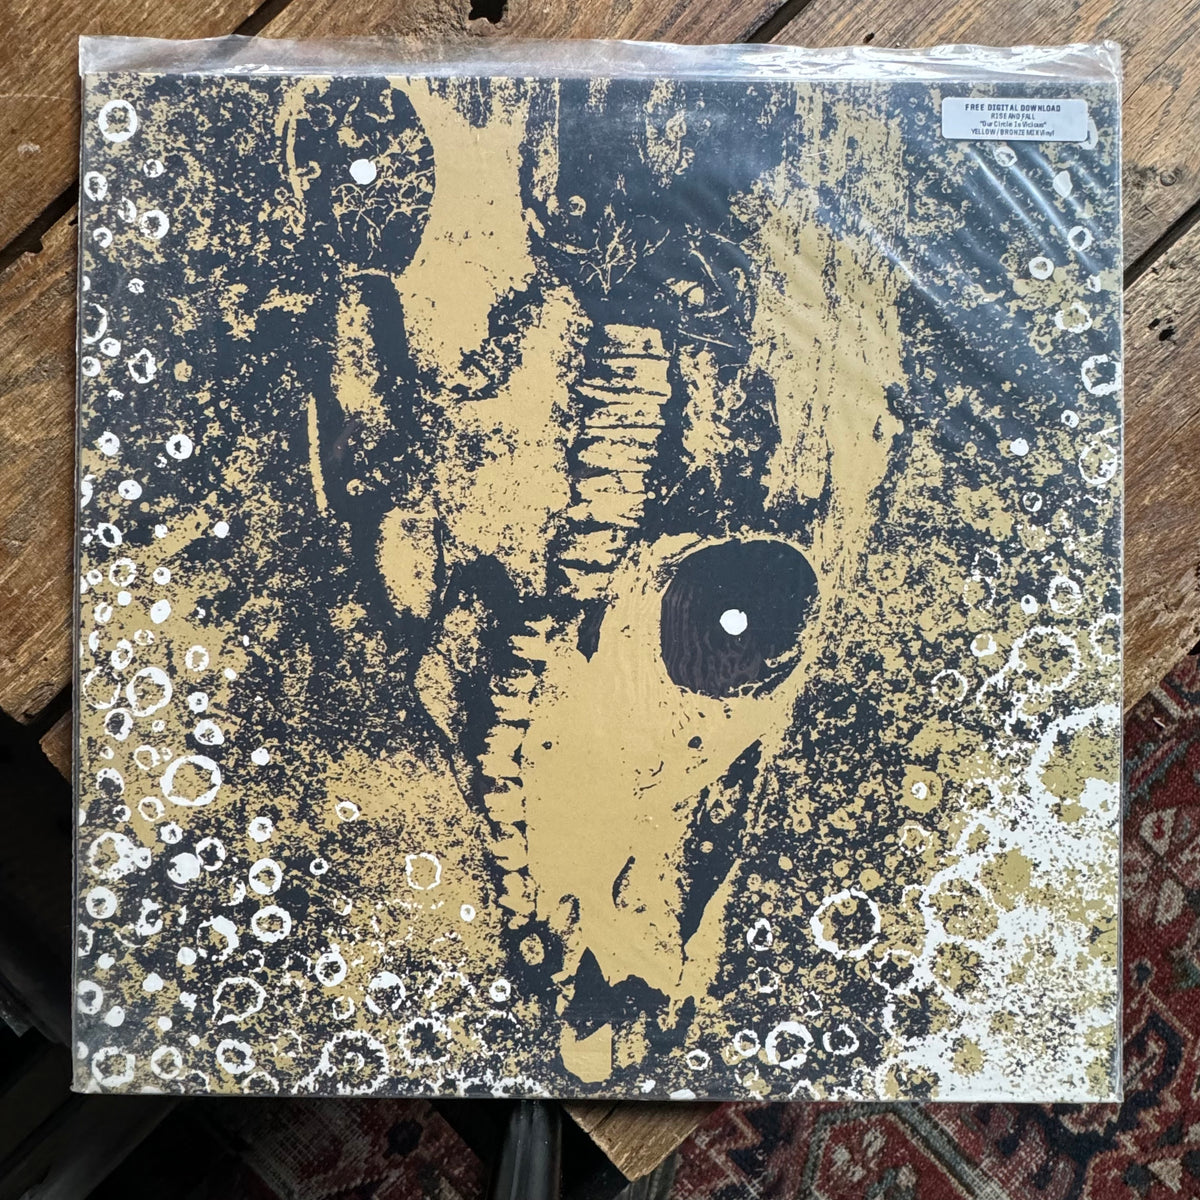 Rise And Fall "Our Circle Is Vicious" LP (Yellow/Bronze Mix)